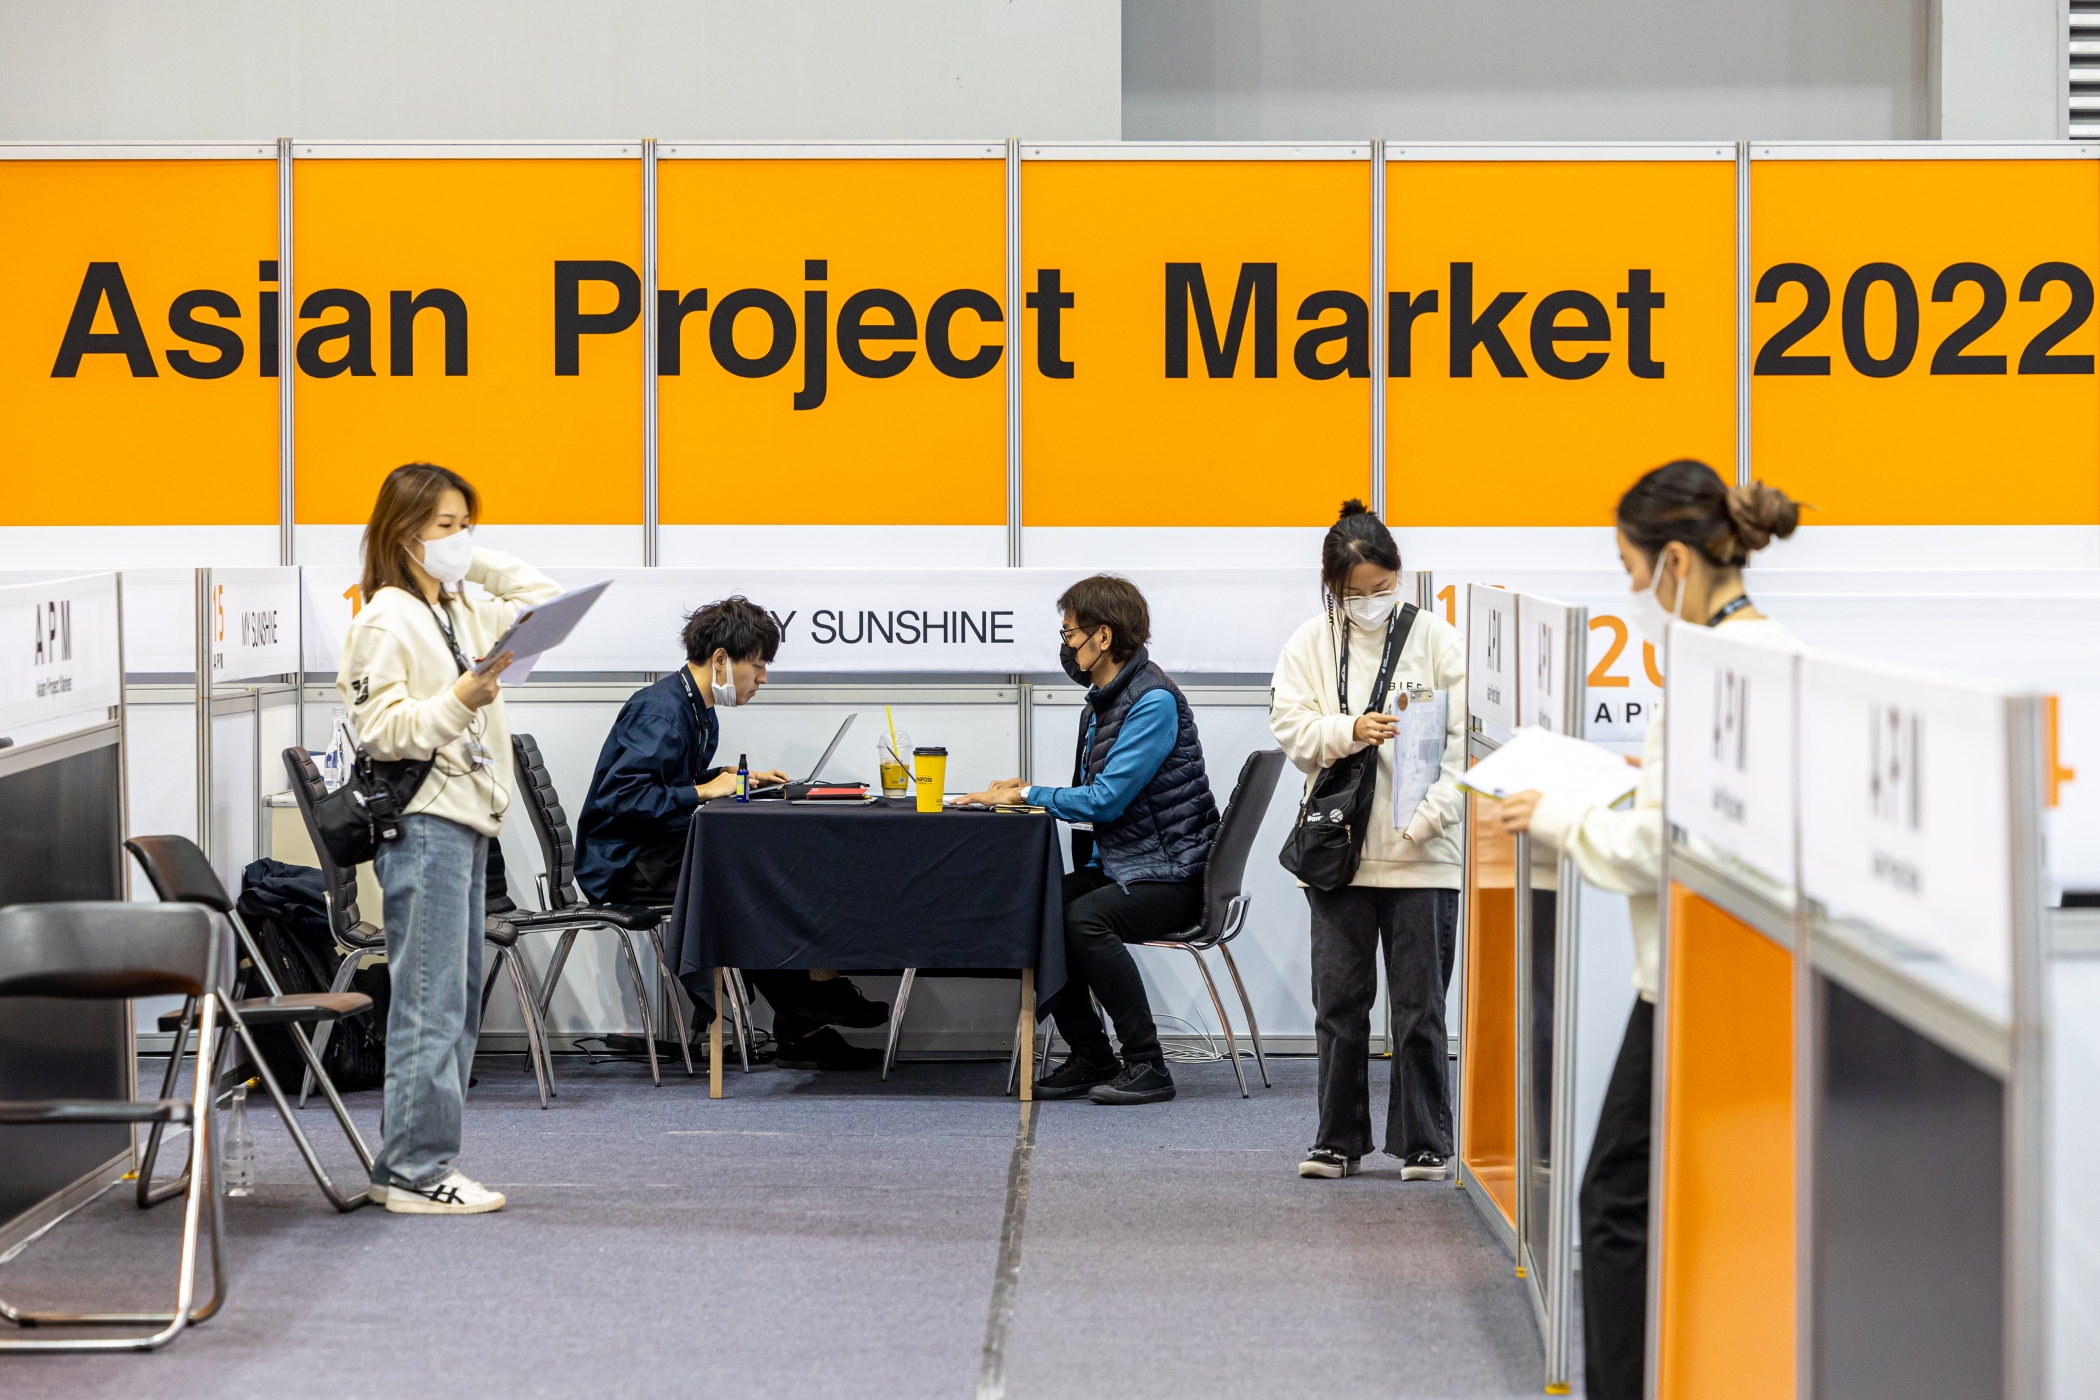 Asian Project Market 2022 Business Meeting